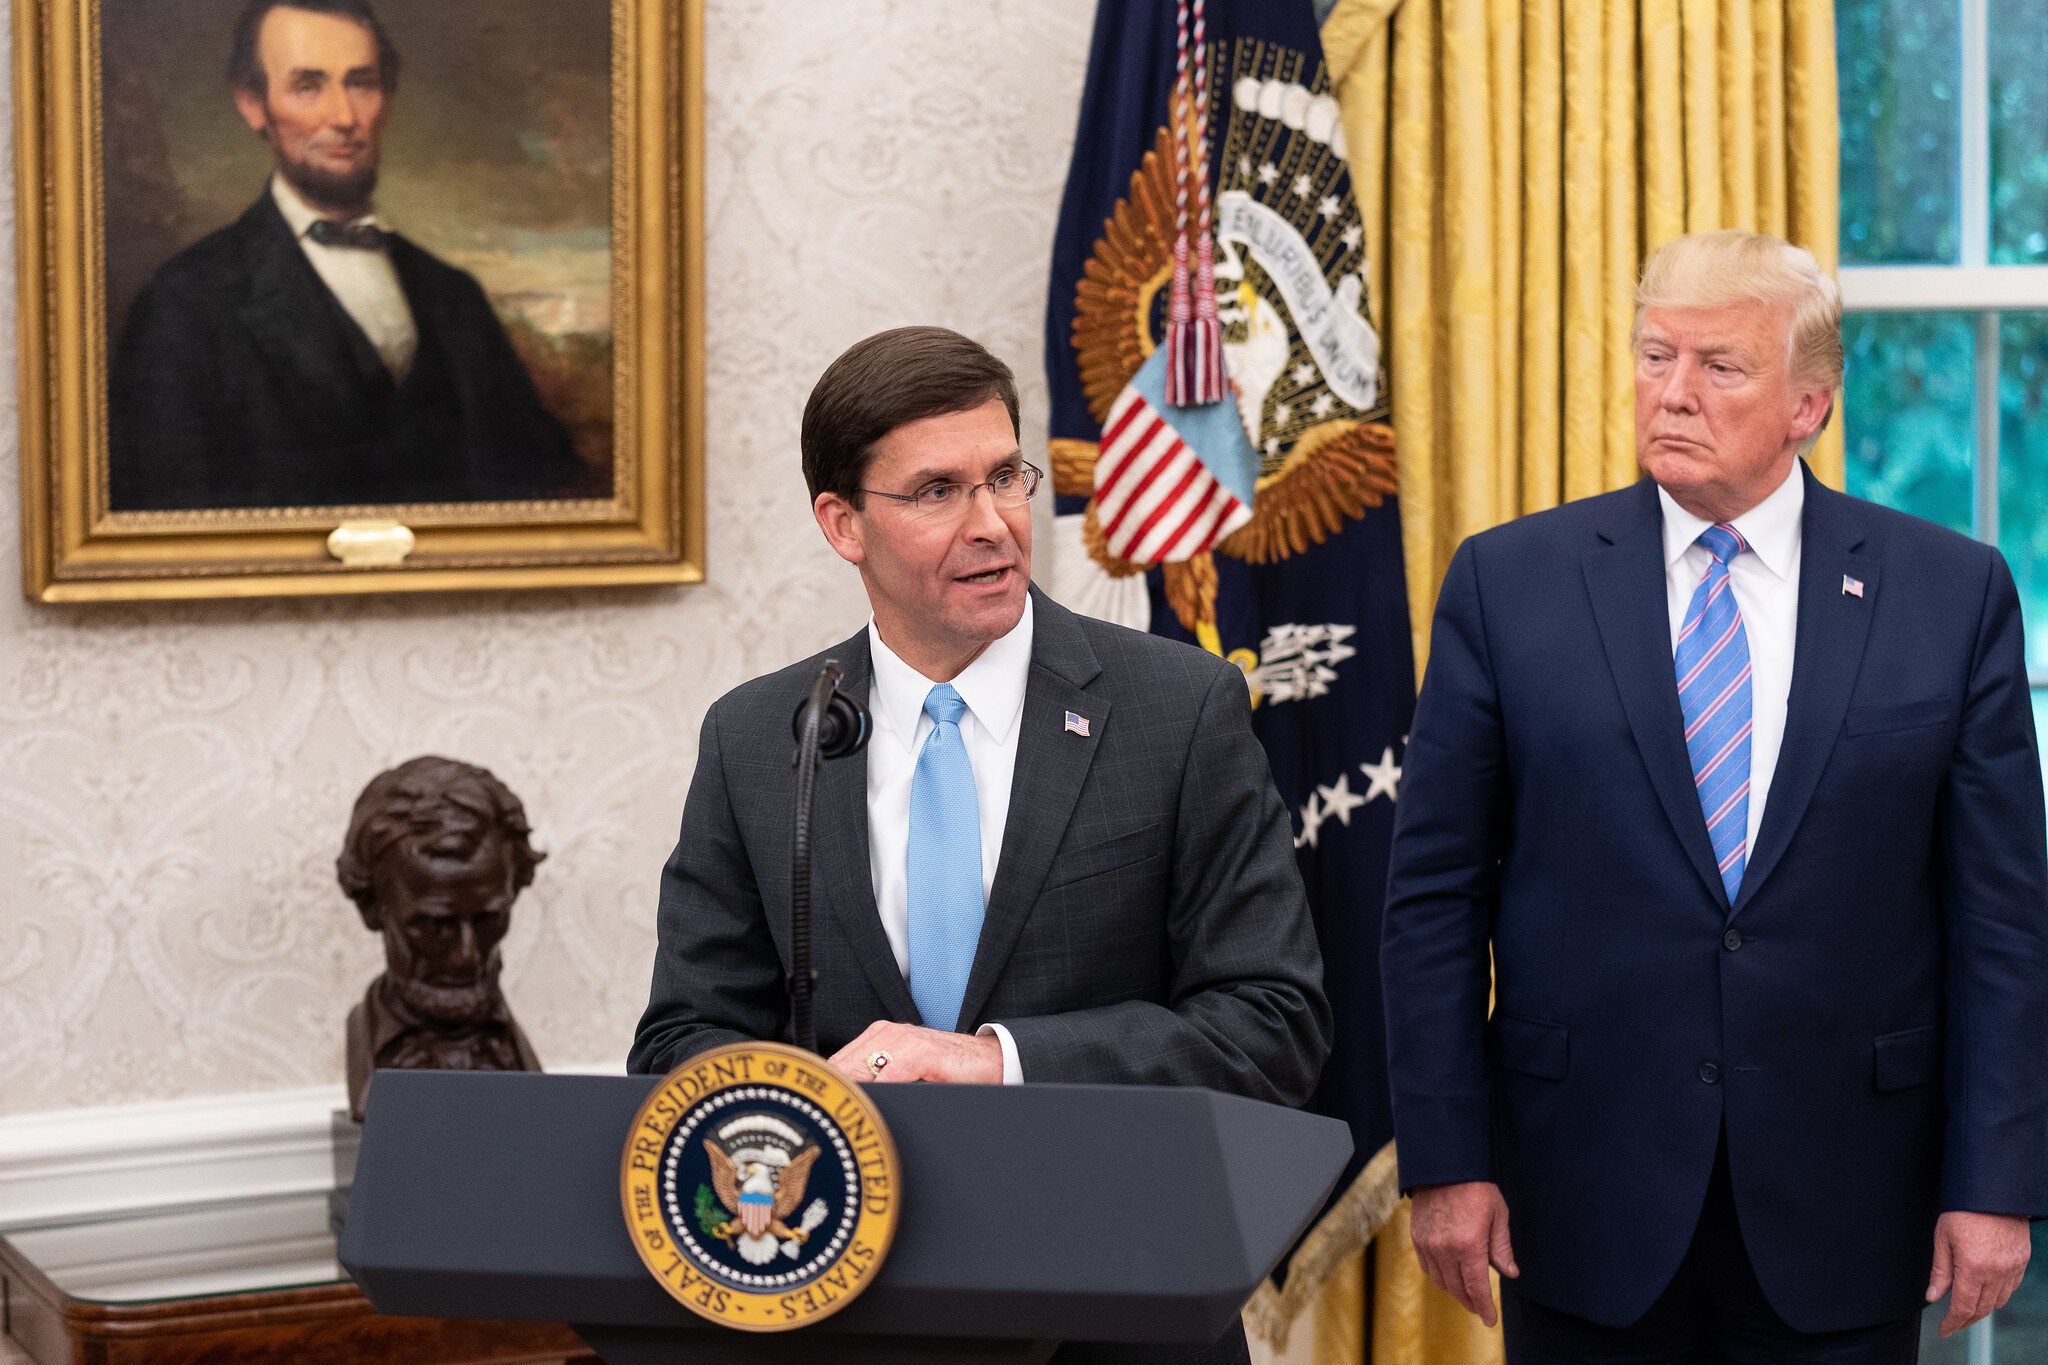 WASHINGTON, July 23rd, 2019. PICTURED: President Donald J. Trump watches as new Secretary of Defense Mark Esper delivers remarks in the Oval Office of the White House.